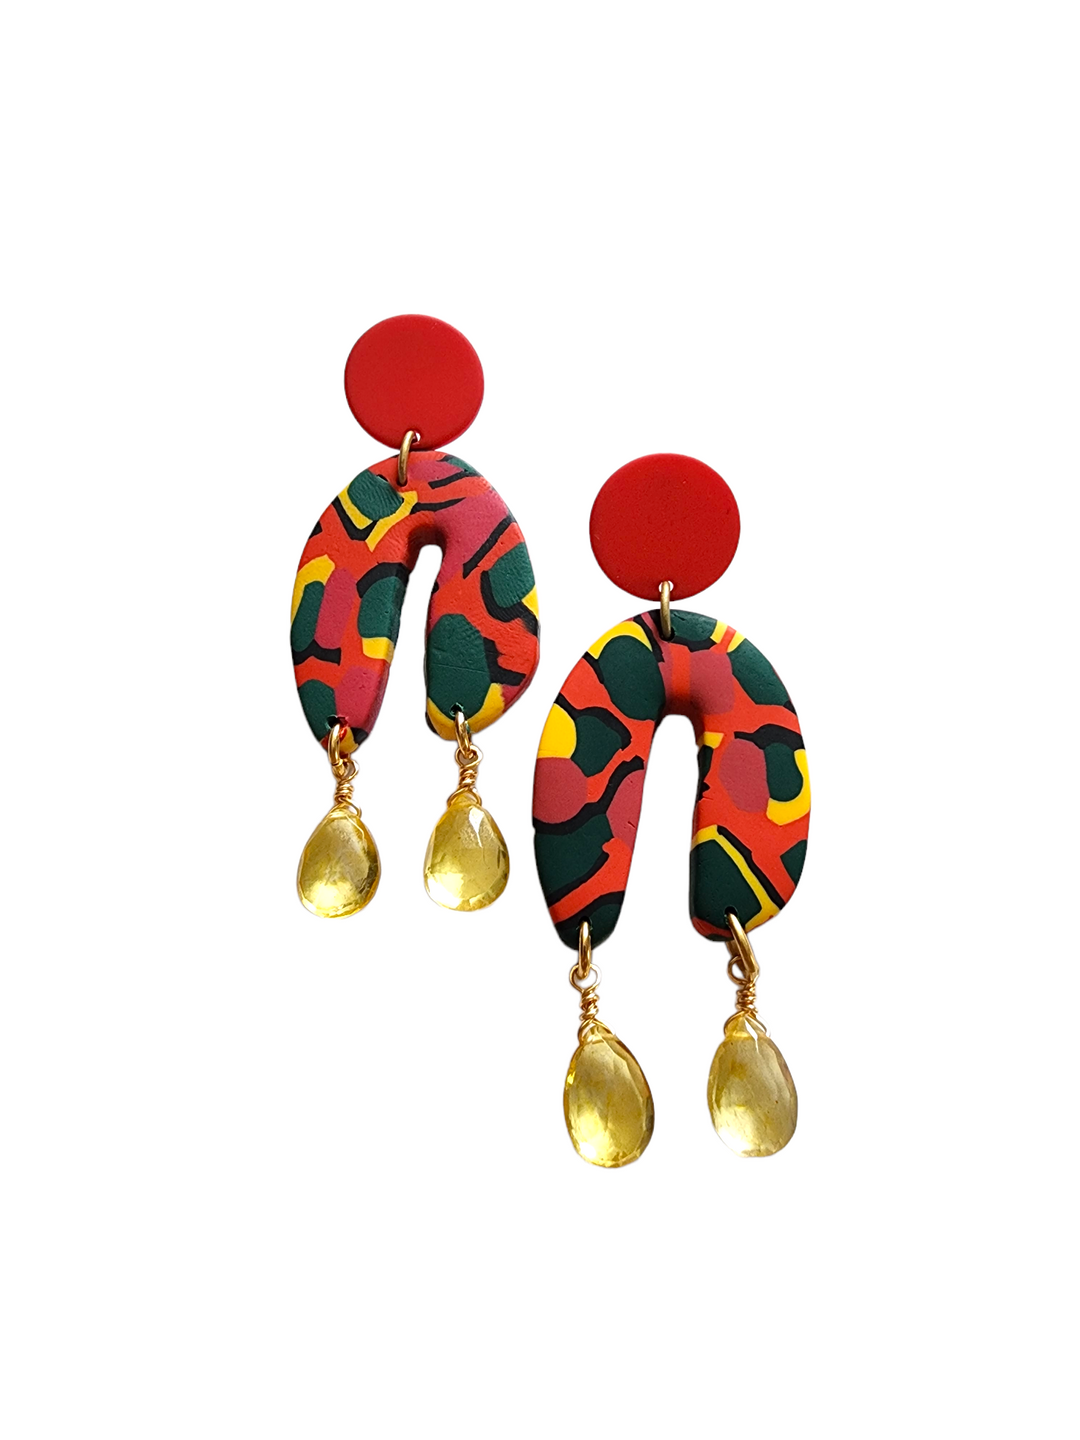 The Torri Clay Earring Collection